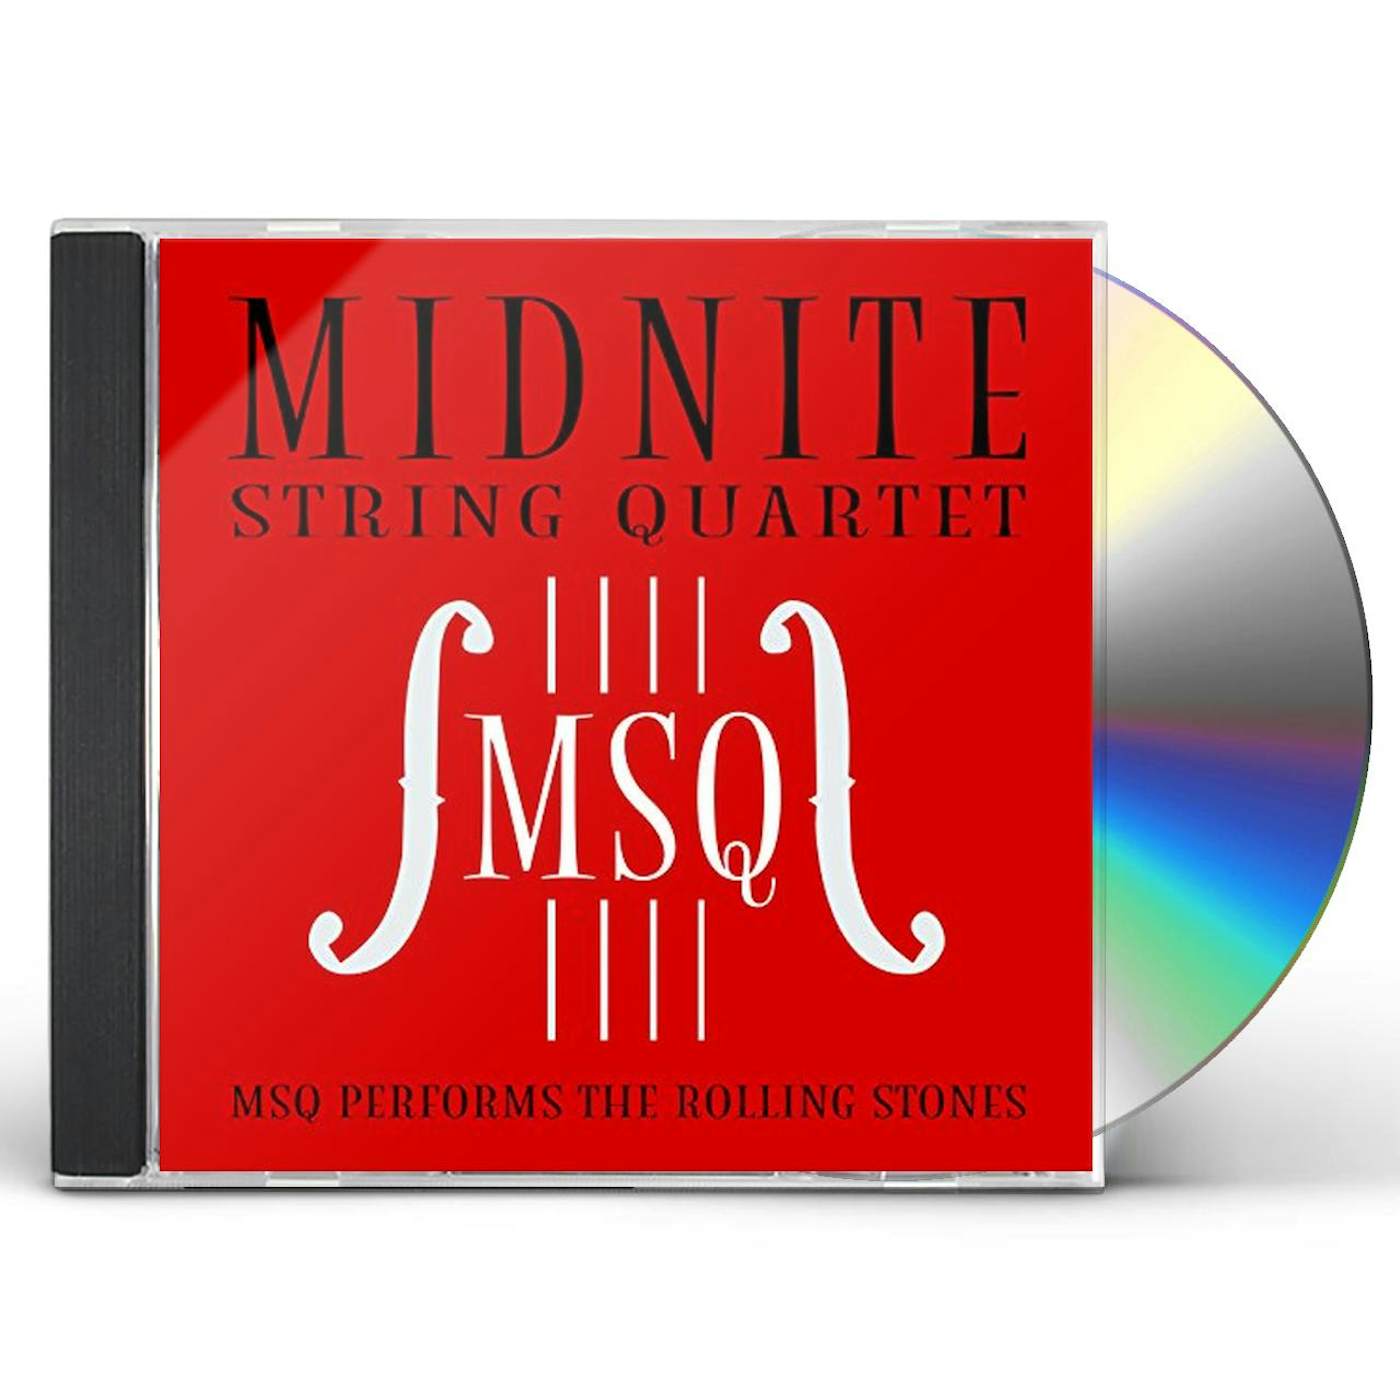 Midnite String Quartet PERFORMS THE ROLLING STONES (MOD) CD